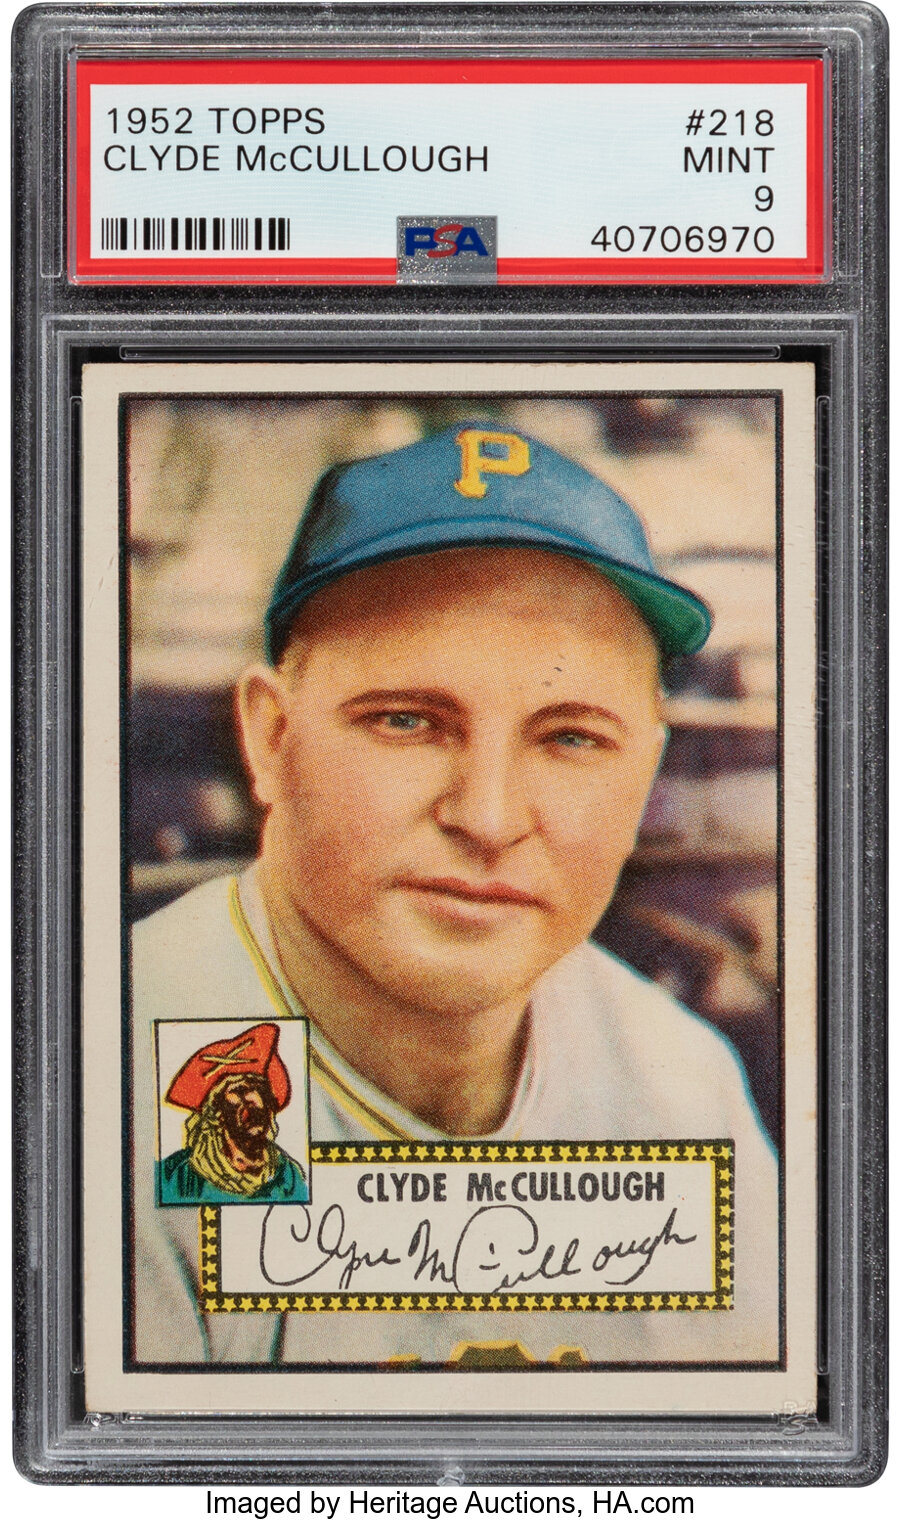 1952 Topps Clyde McCullough #218 PSA Mint 9 - None Higher